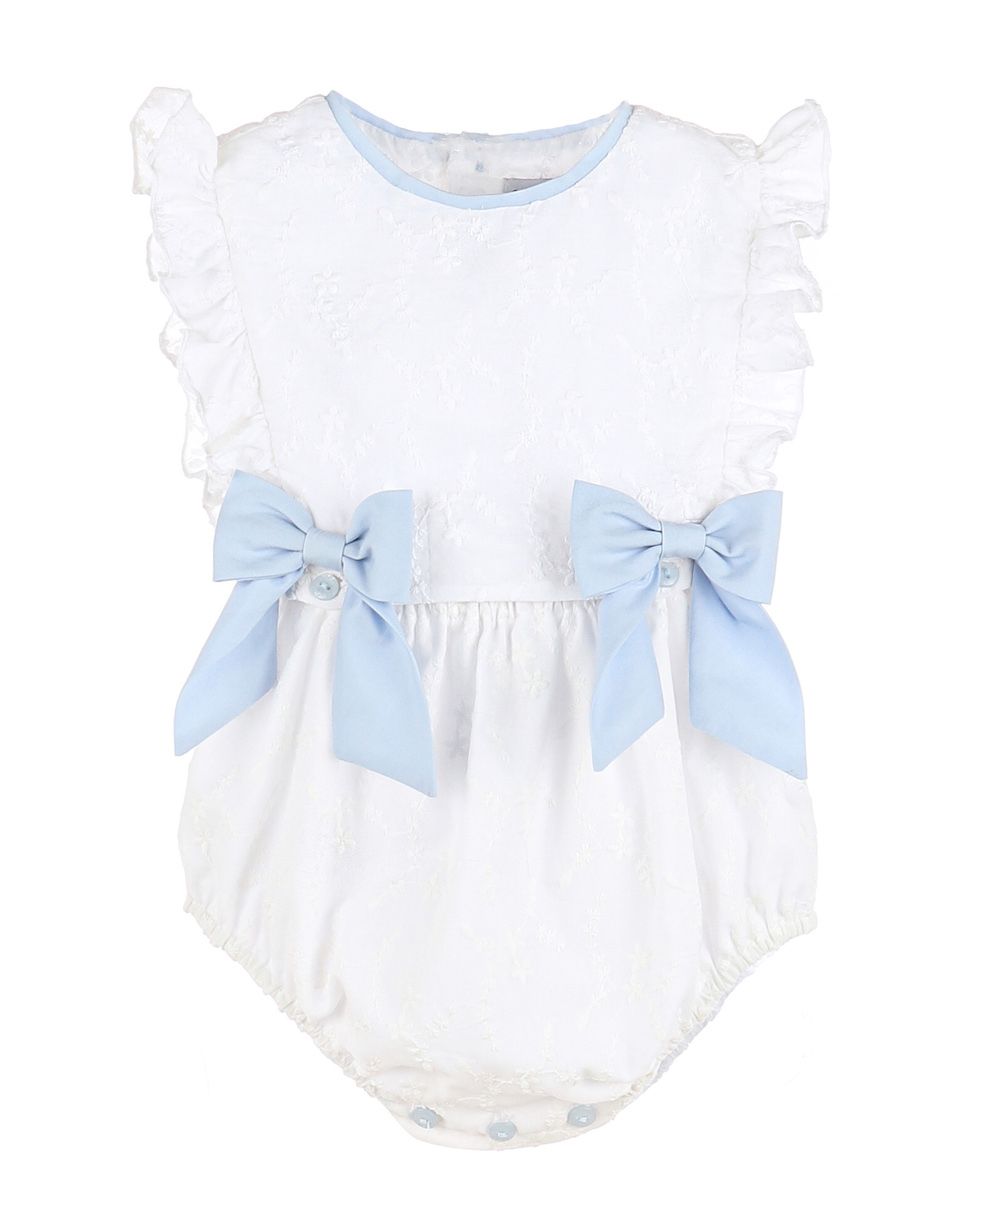 White & Blue Classic Overall With Bows